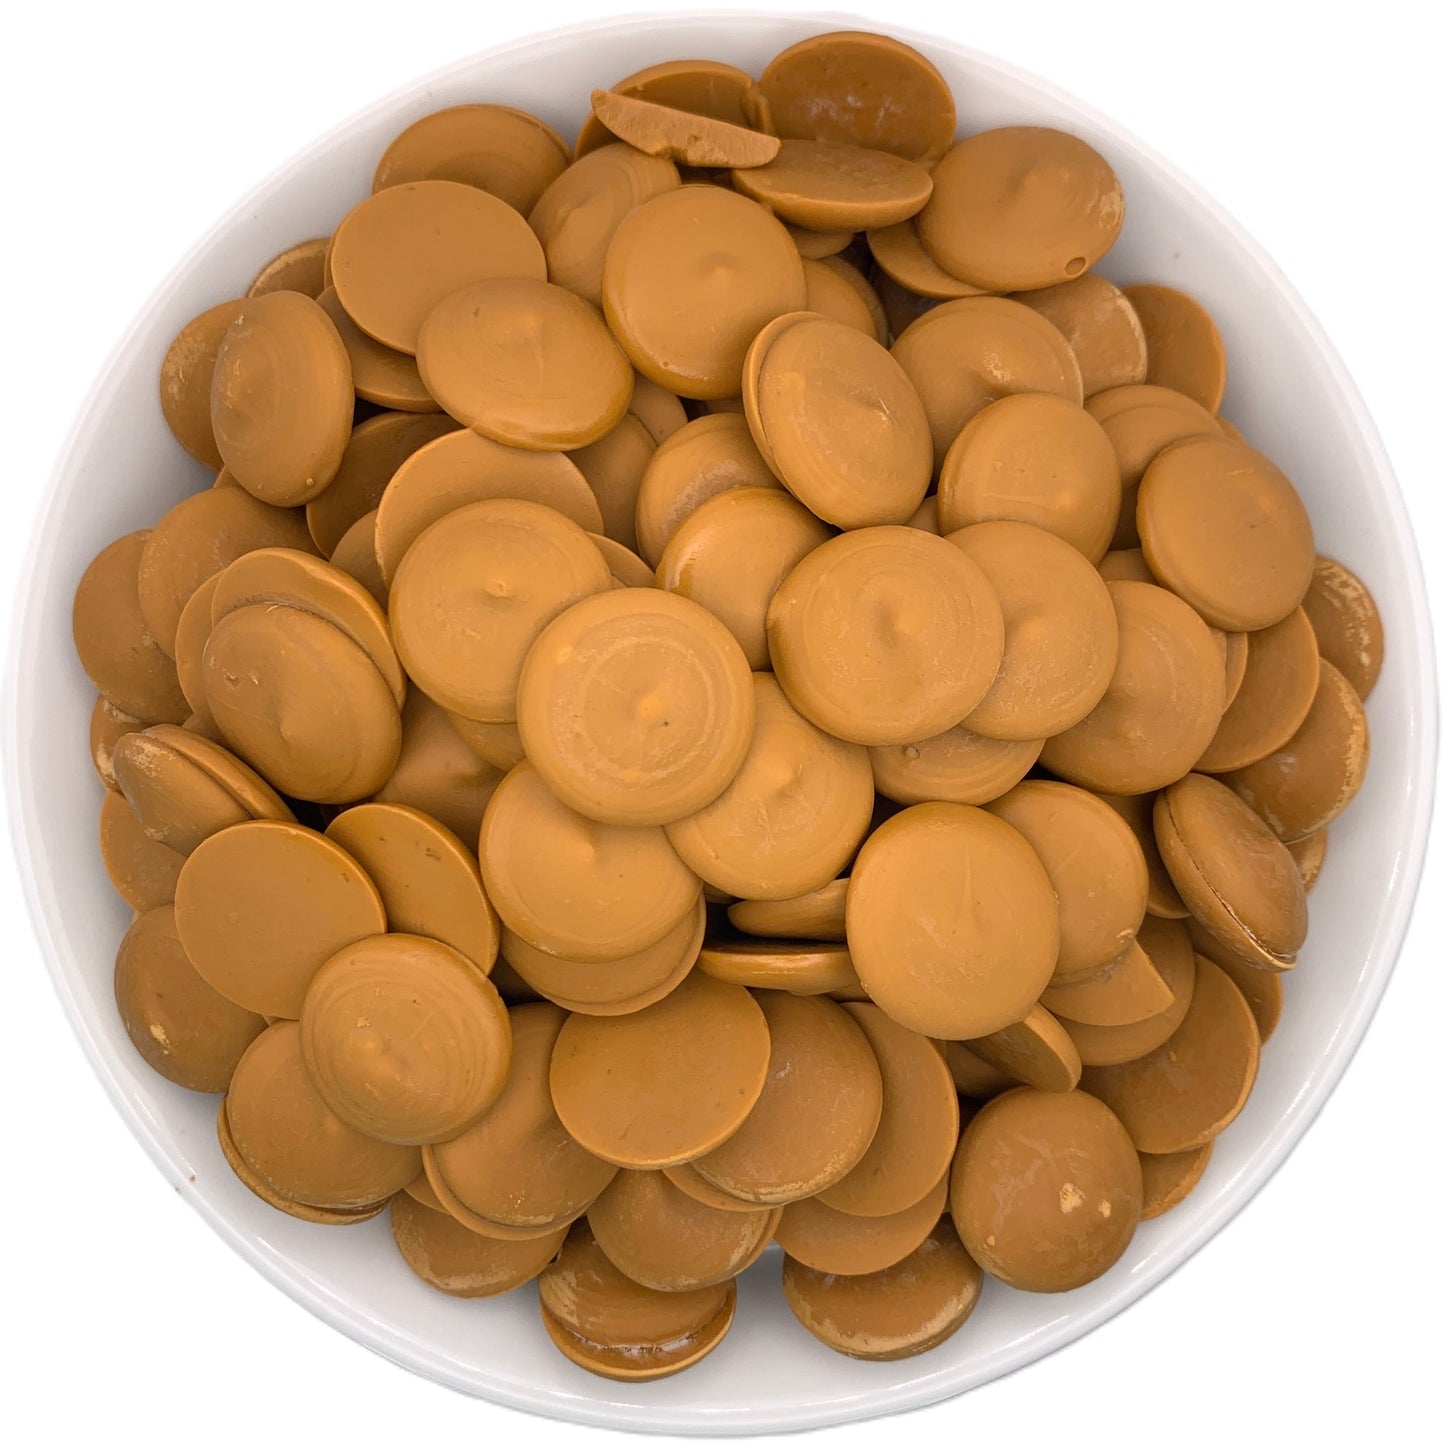 Overhead shot of sea salt caramel flavored chocolate melting wafers, displaying their unique color and inviting aroma, perfect for creating indulgent caramel-infused chocolates